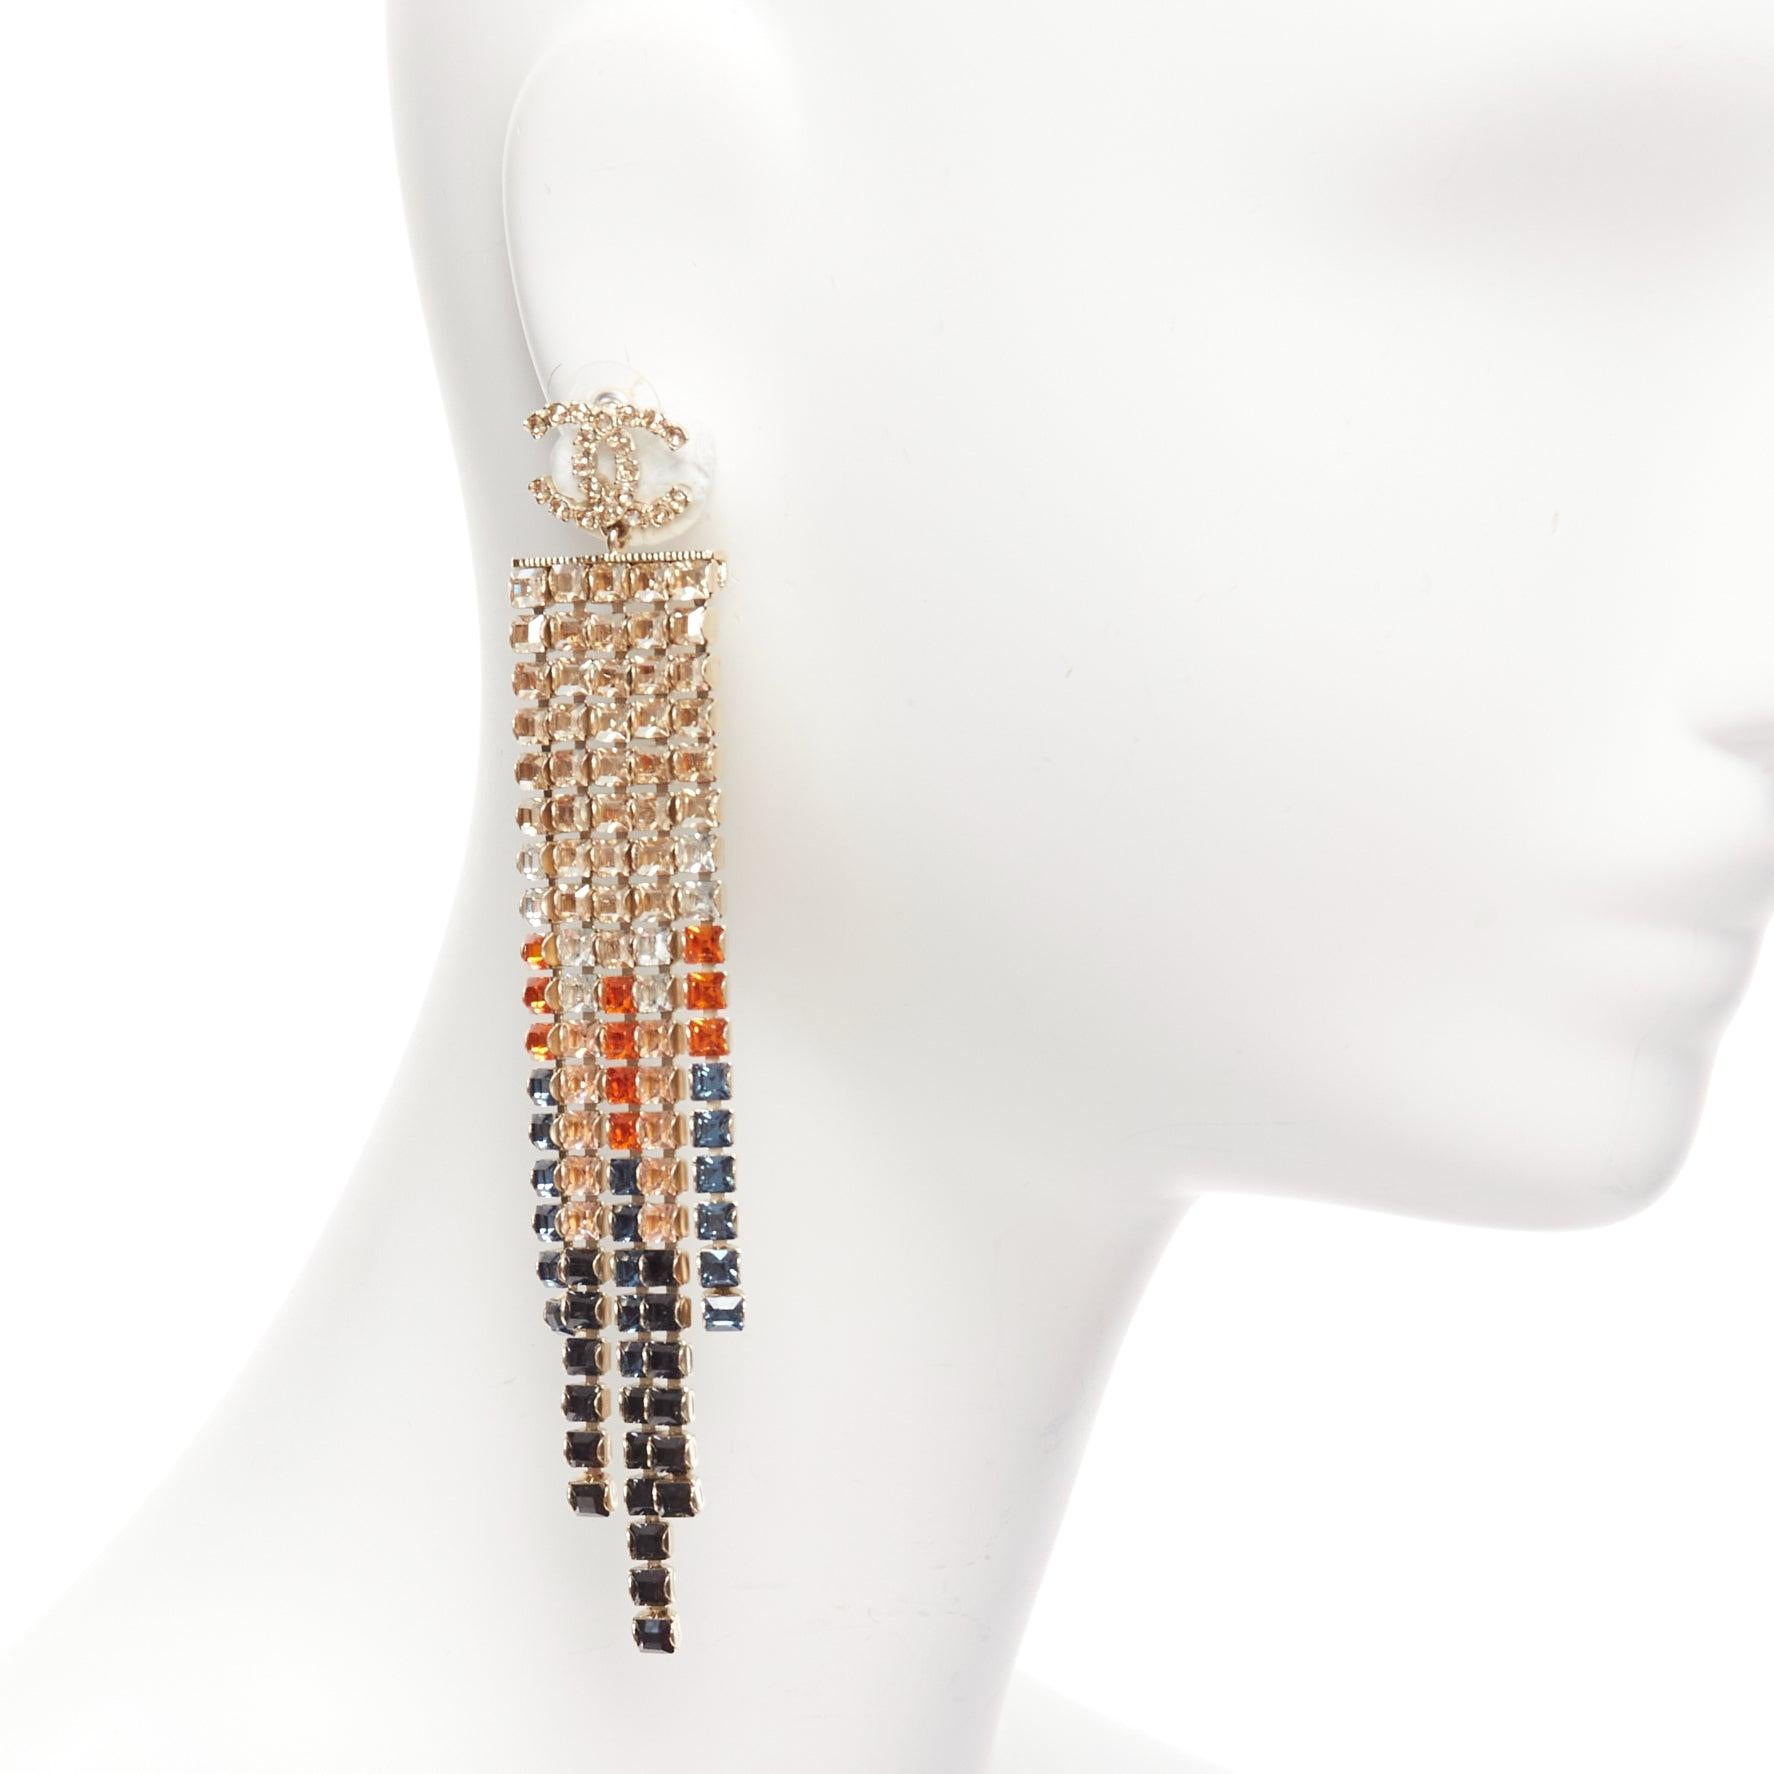 CHANEL A19A gold CC crystal gradient tassel cascade drop pin earrings pair
Reference: AAWC/A01064
Brand: Chanel
Designer: Karl Lagerfeld
Collection: A19A
Material: Metal
Color: Gold, Multicolour
Pattern: Crystals
Closure: Pin
Lining: Gold Metal
Made